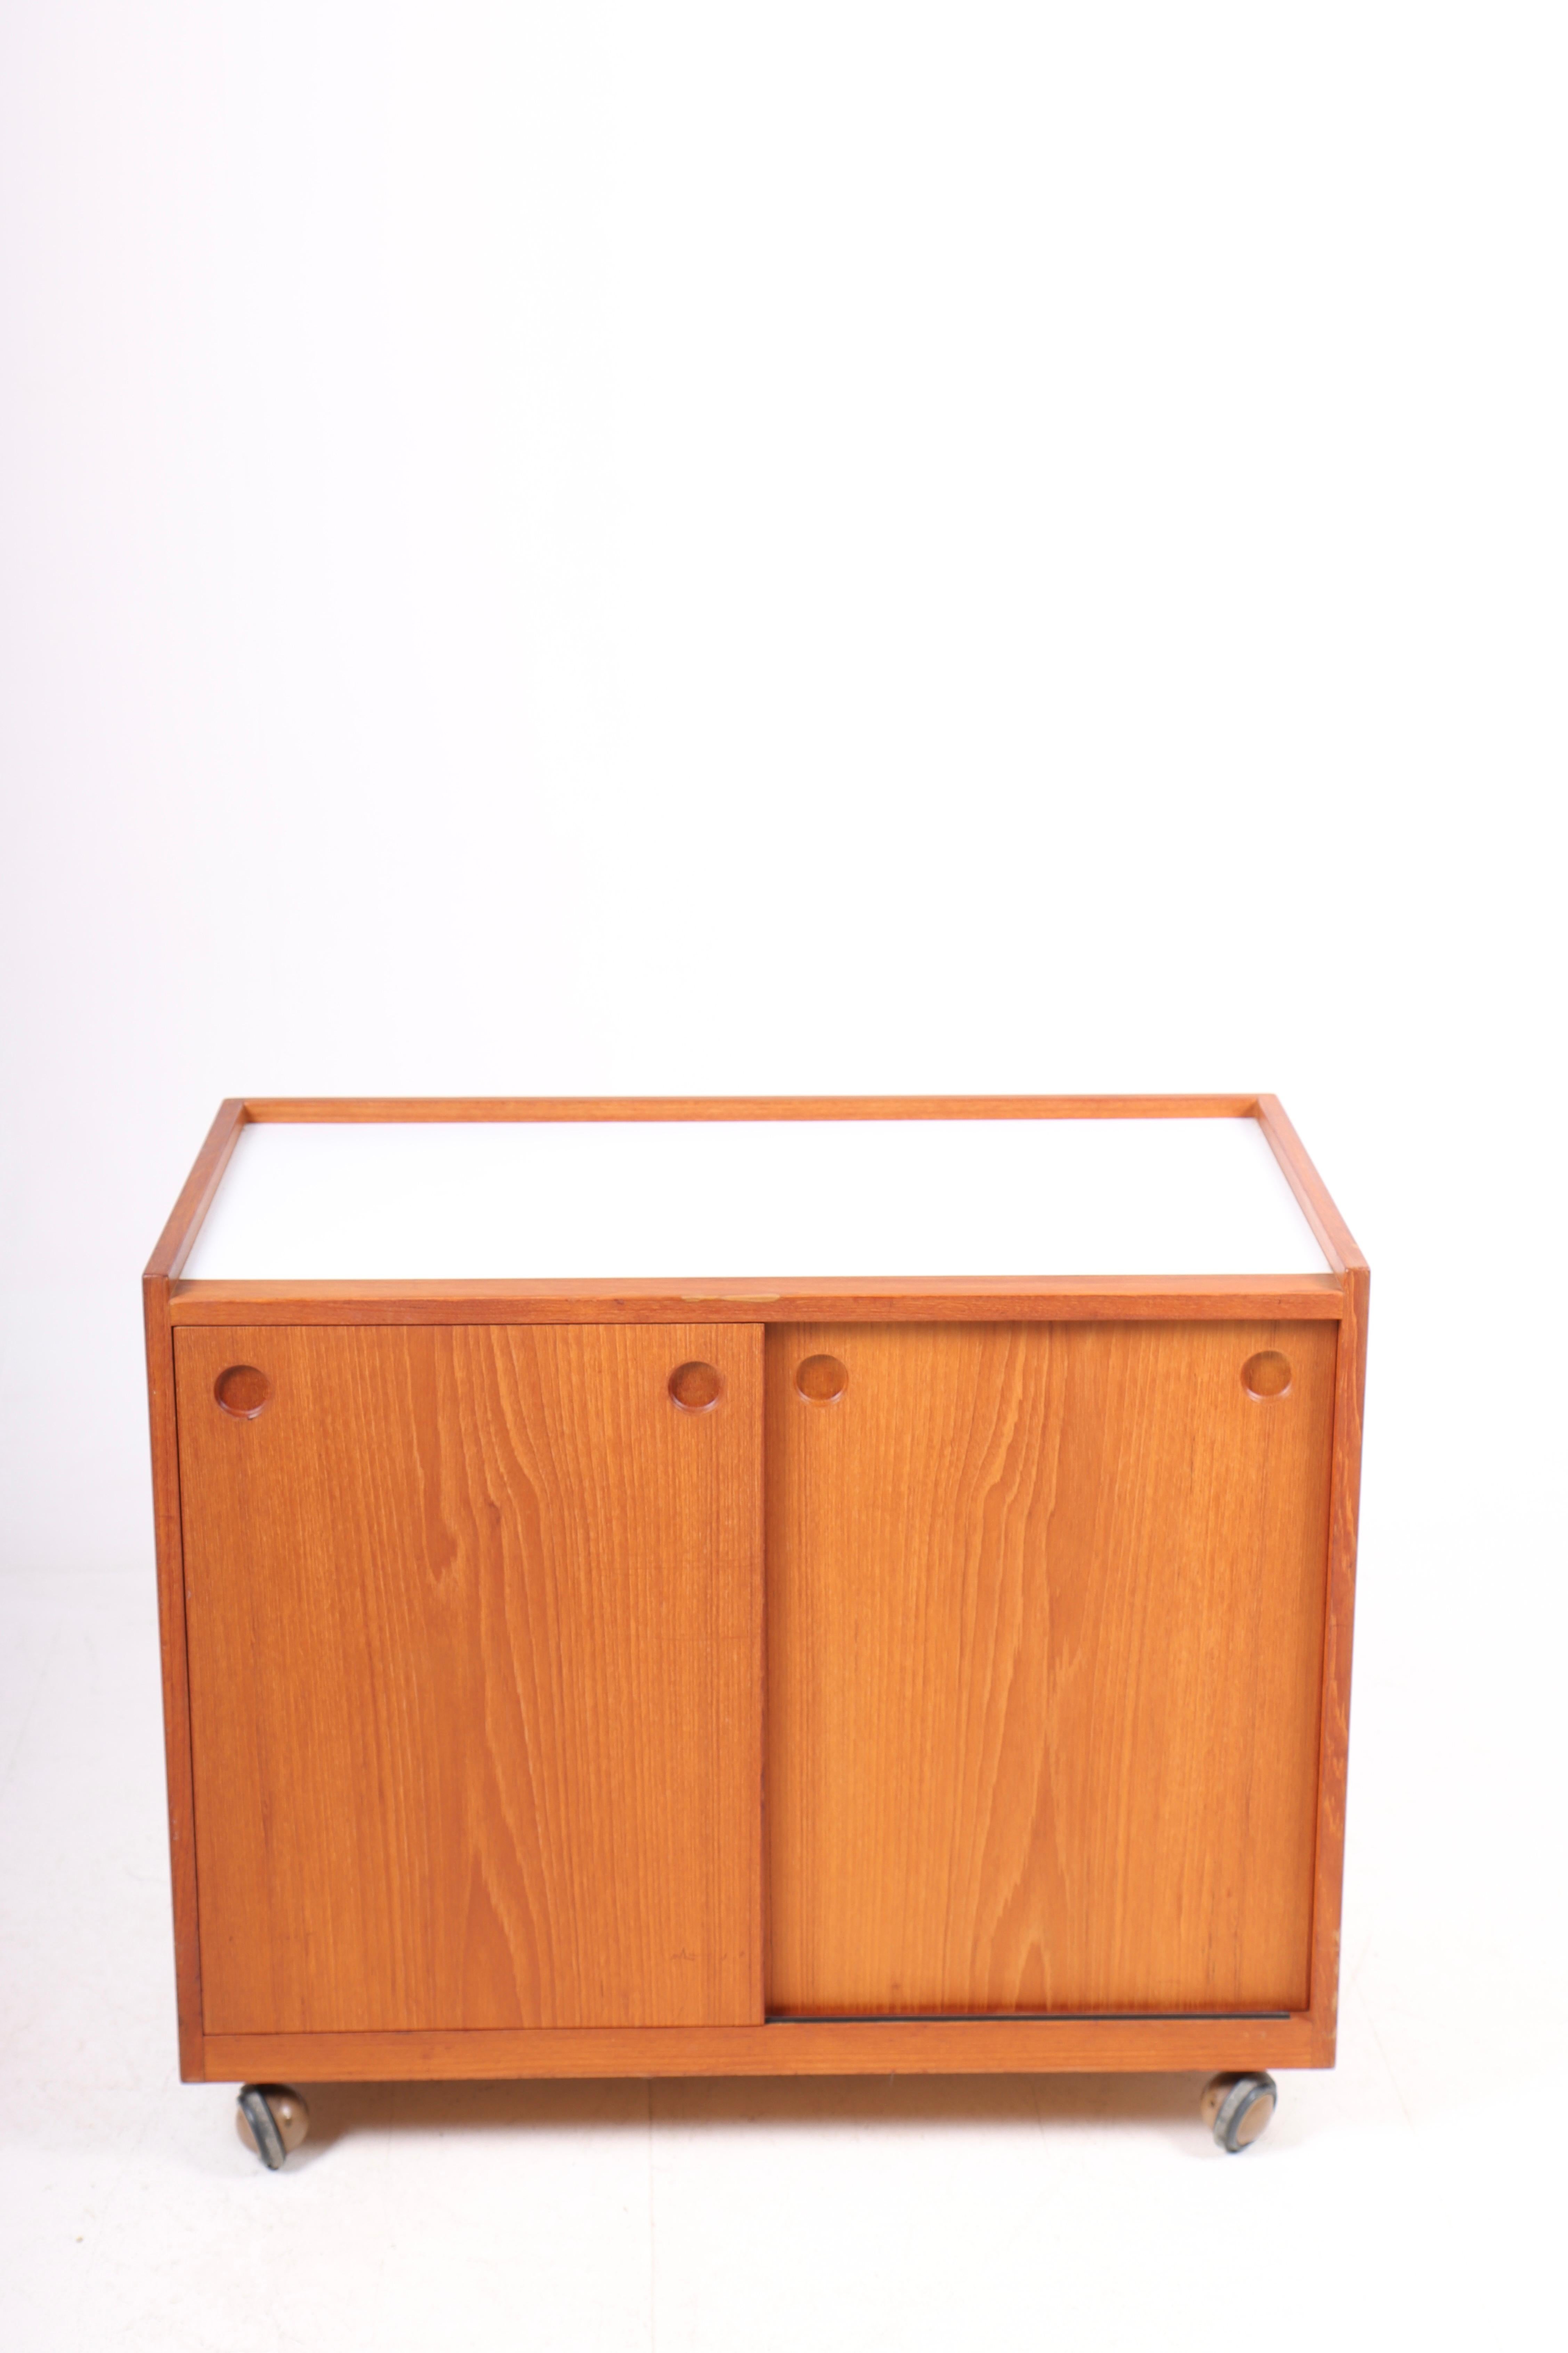 Mid-Century Modern bar cabinet in teak with formica, designed and made in Denmark, 1960s.